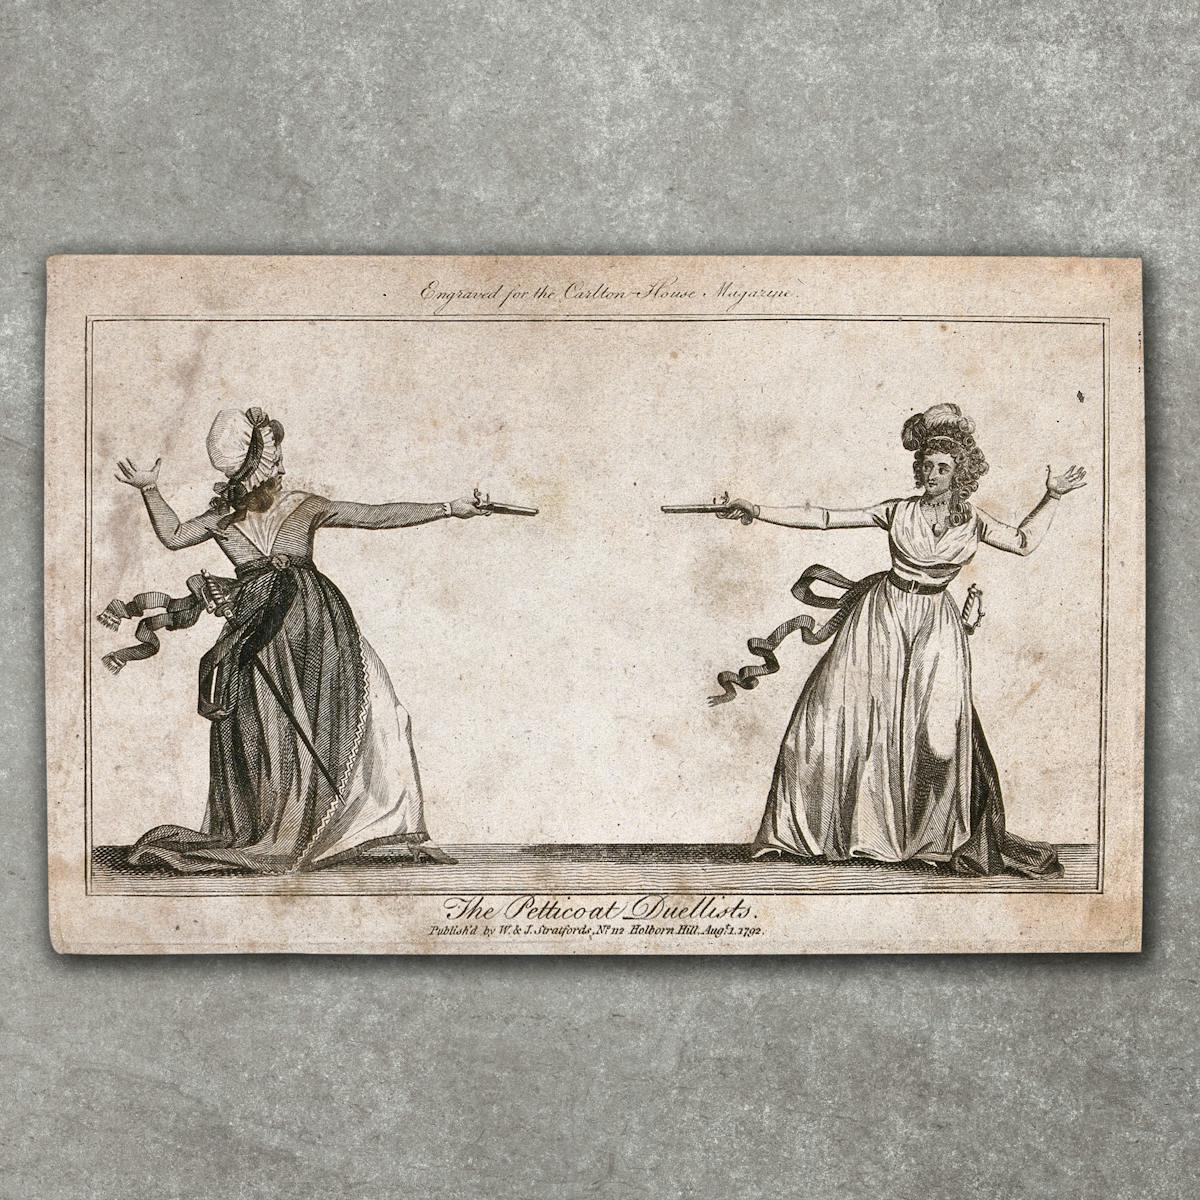 Archive engraving from 1792 showing a lady and a woman of lower rank duelling with pistols. They are facing each other, pistols drawn and pointing at each other. Their other arm and hand are raised. They are both wearing long full skirts and hats. Under the drawing is the title, 'The Petticoat Duellists'. The engraving is placed just above a grey concrete textured background such that a small shadow is cast.